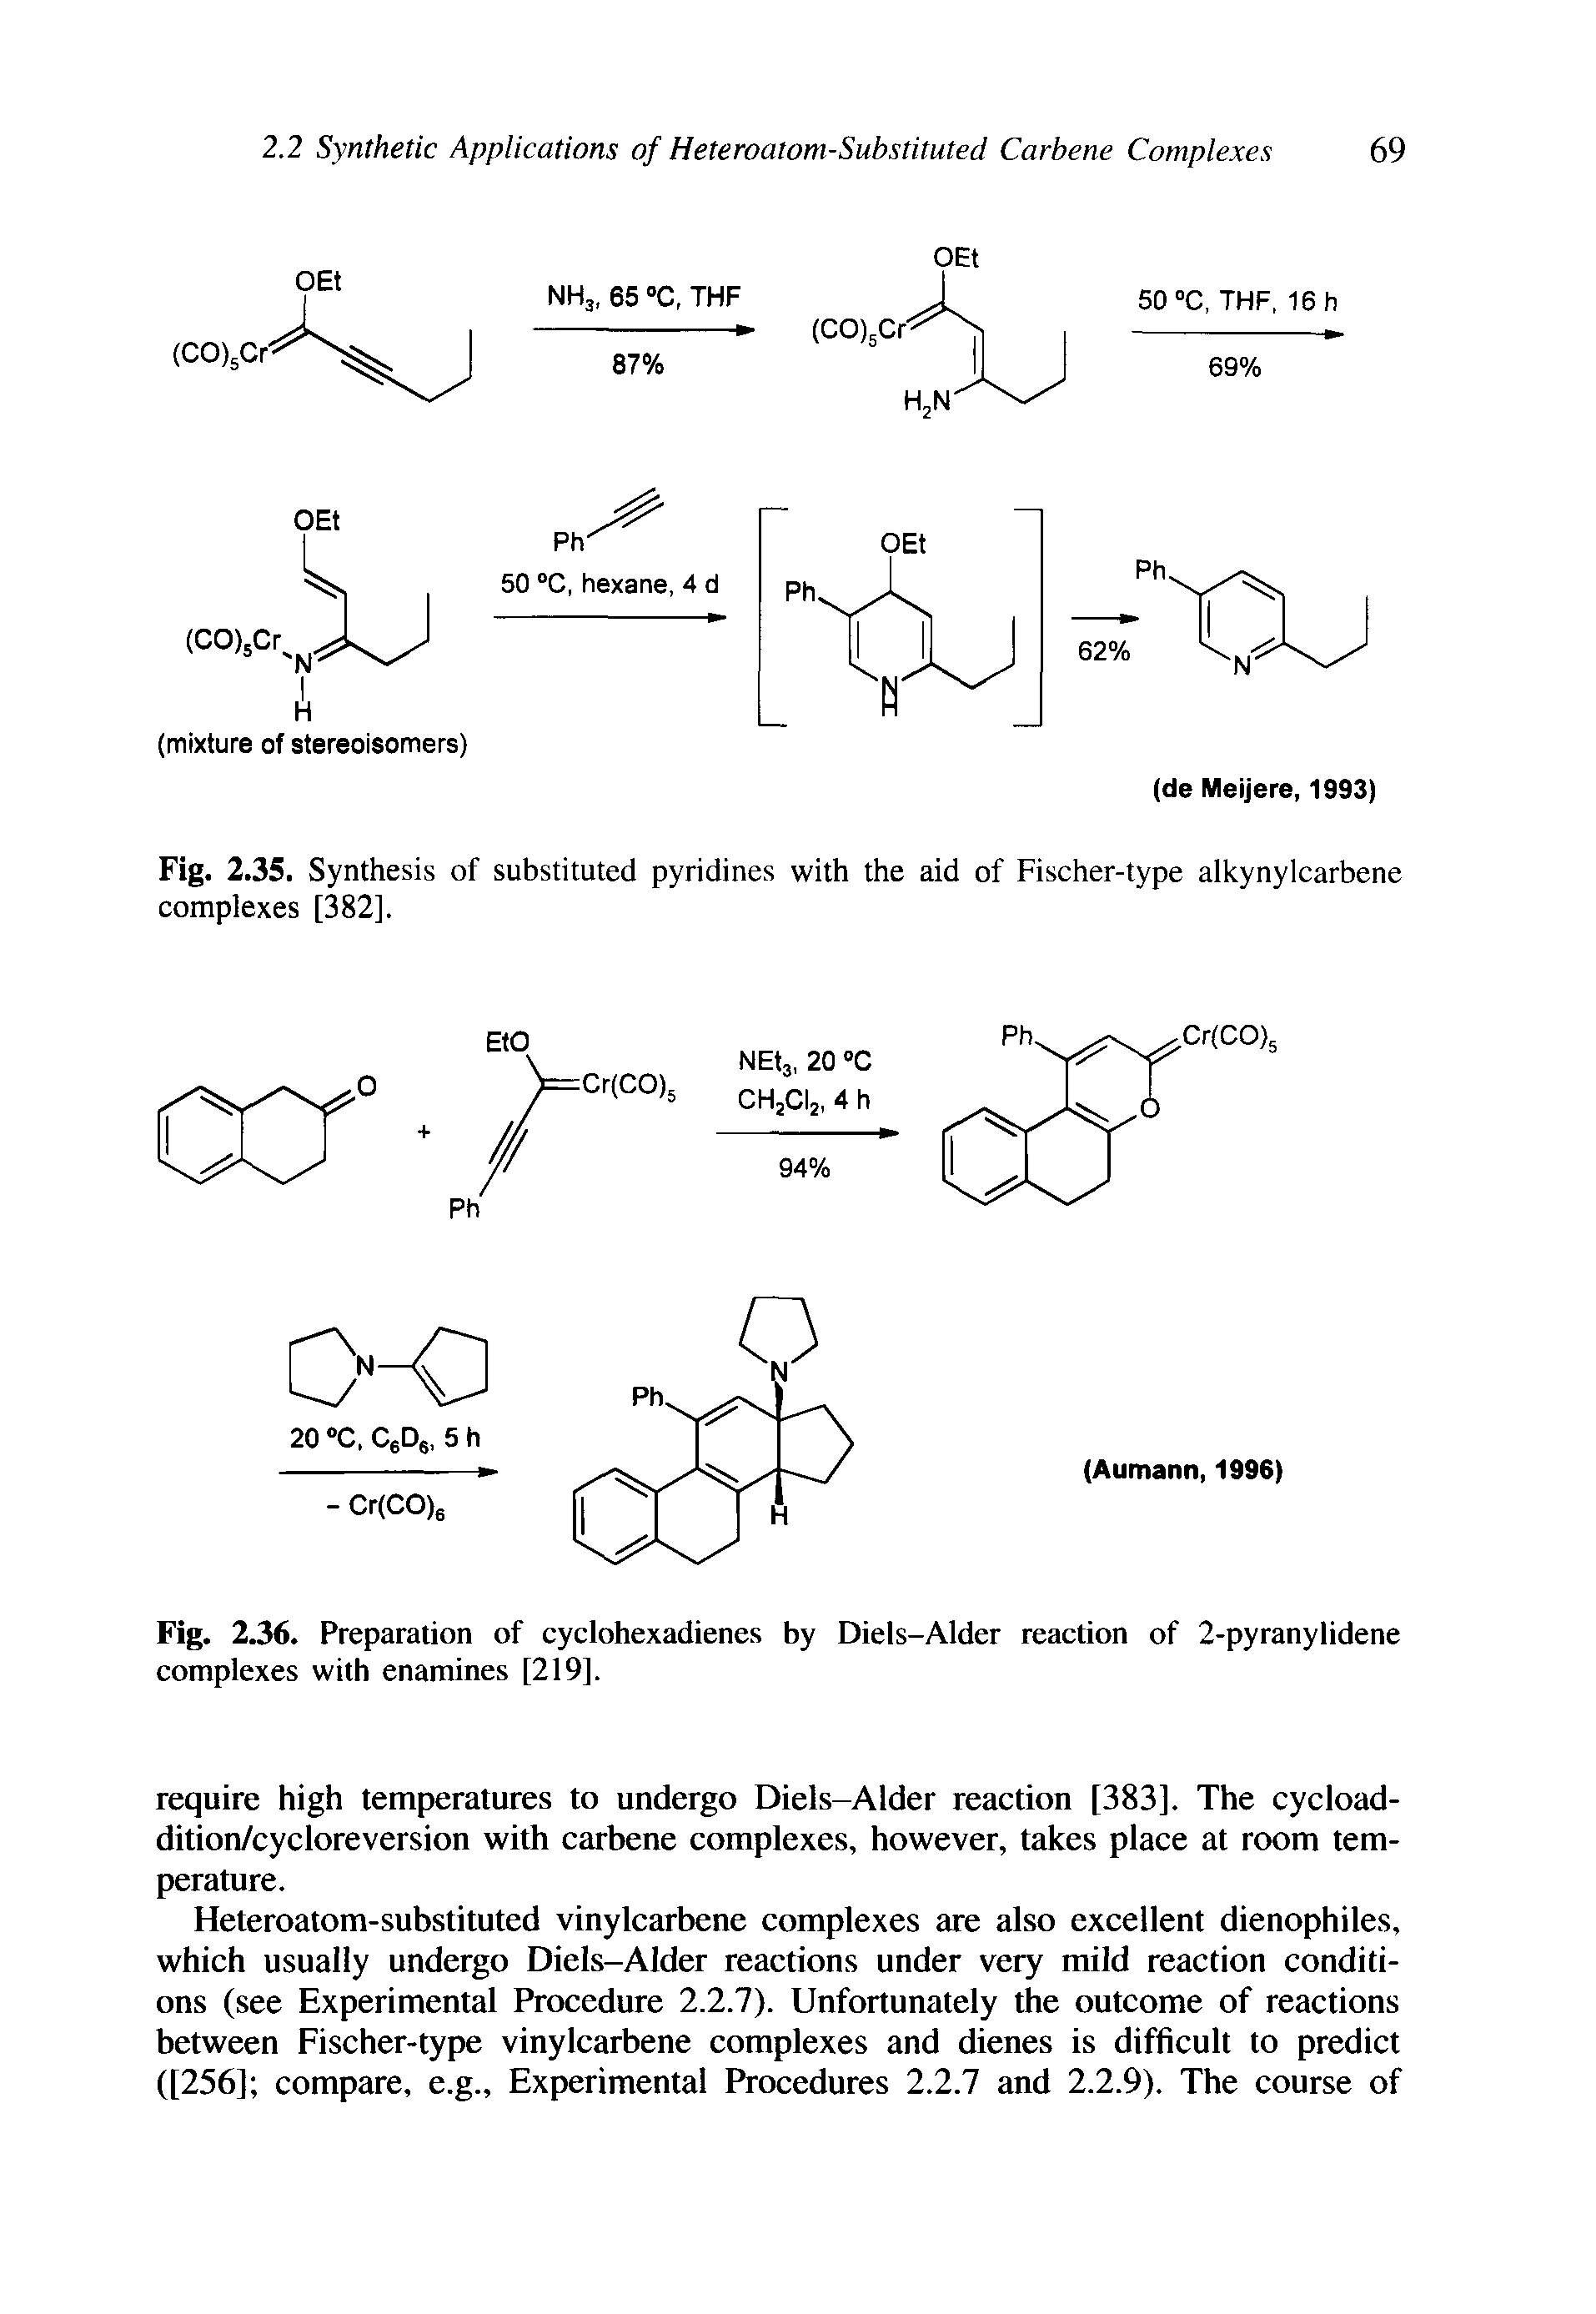 Fig. 2.35. Synthesis of substituted pyridines with the aid of Fischer-type alkynylcarbene complexes [382].